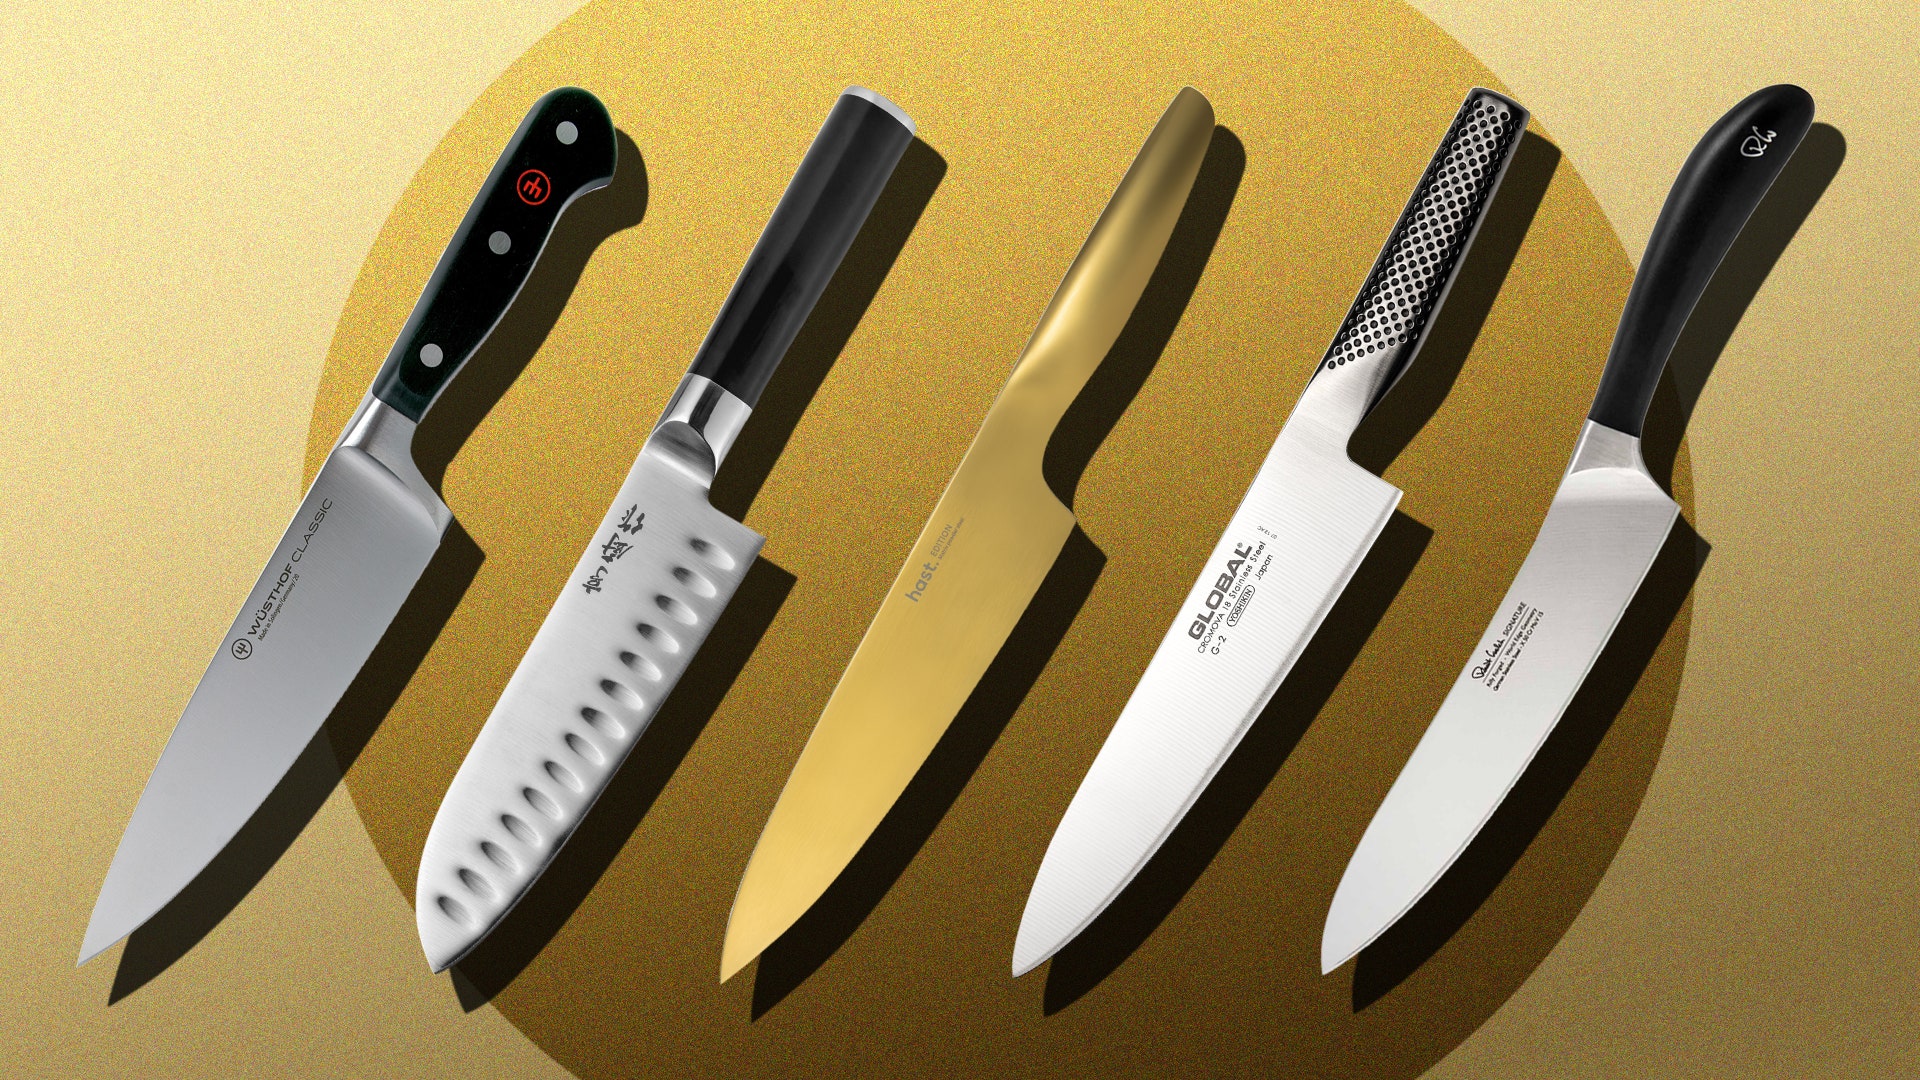 Best kitchen knives 2022: Lakeland to Zwilling